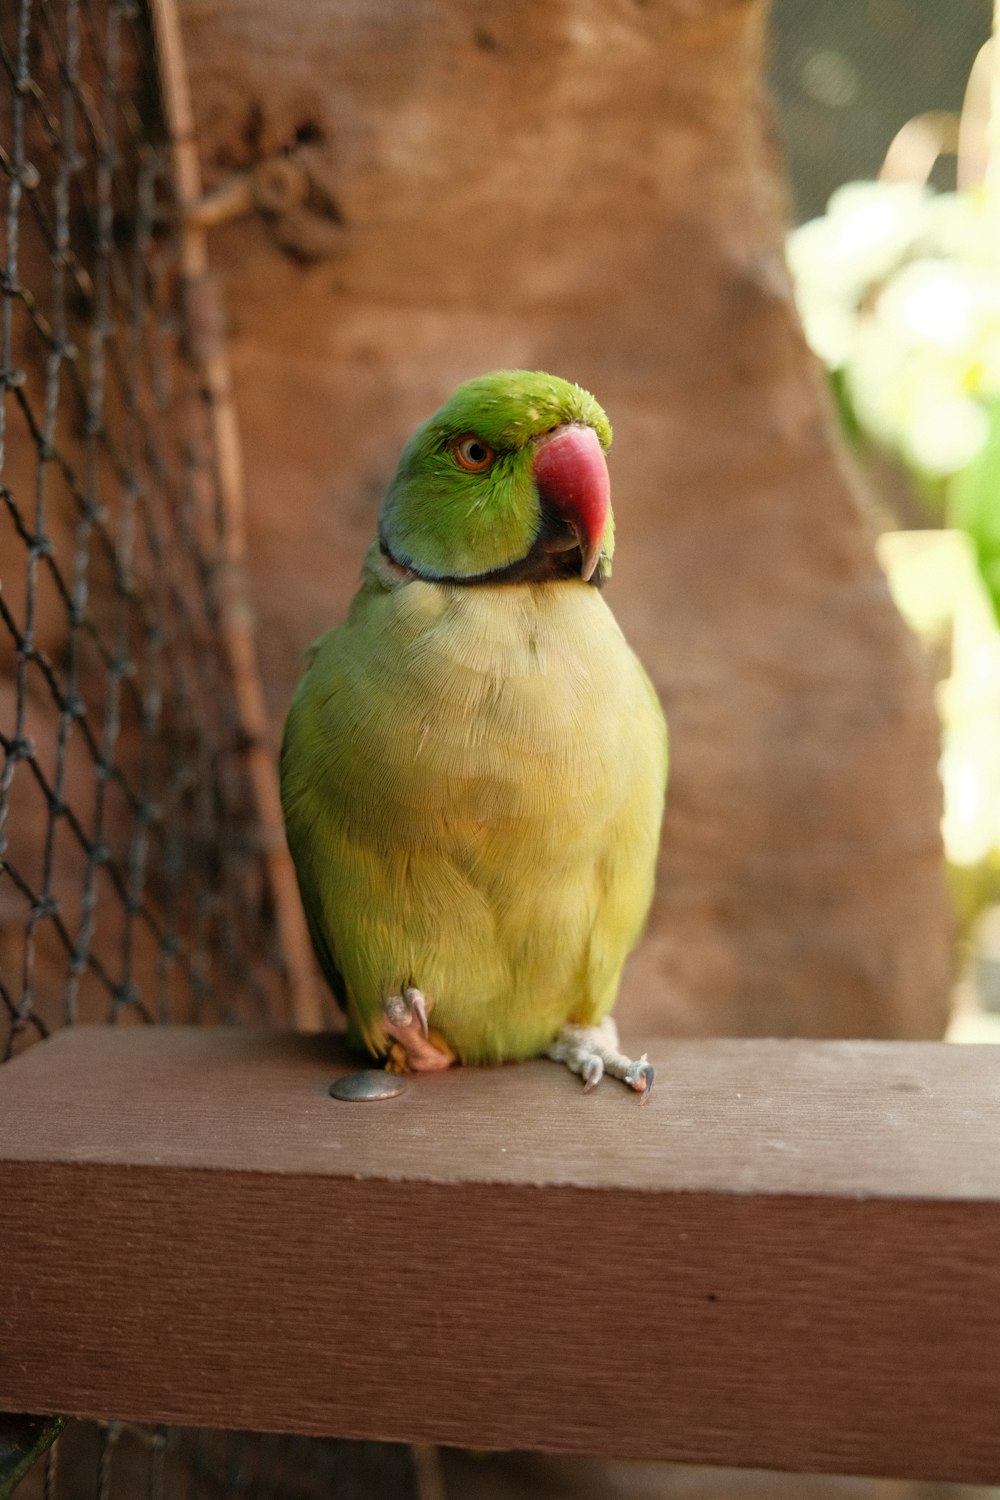 a green bird sitting on a wooden ledge